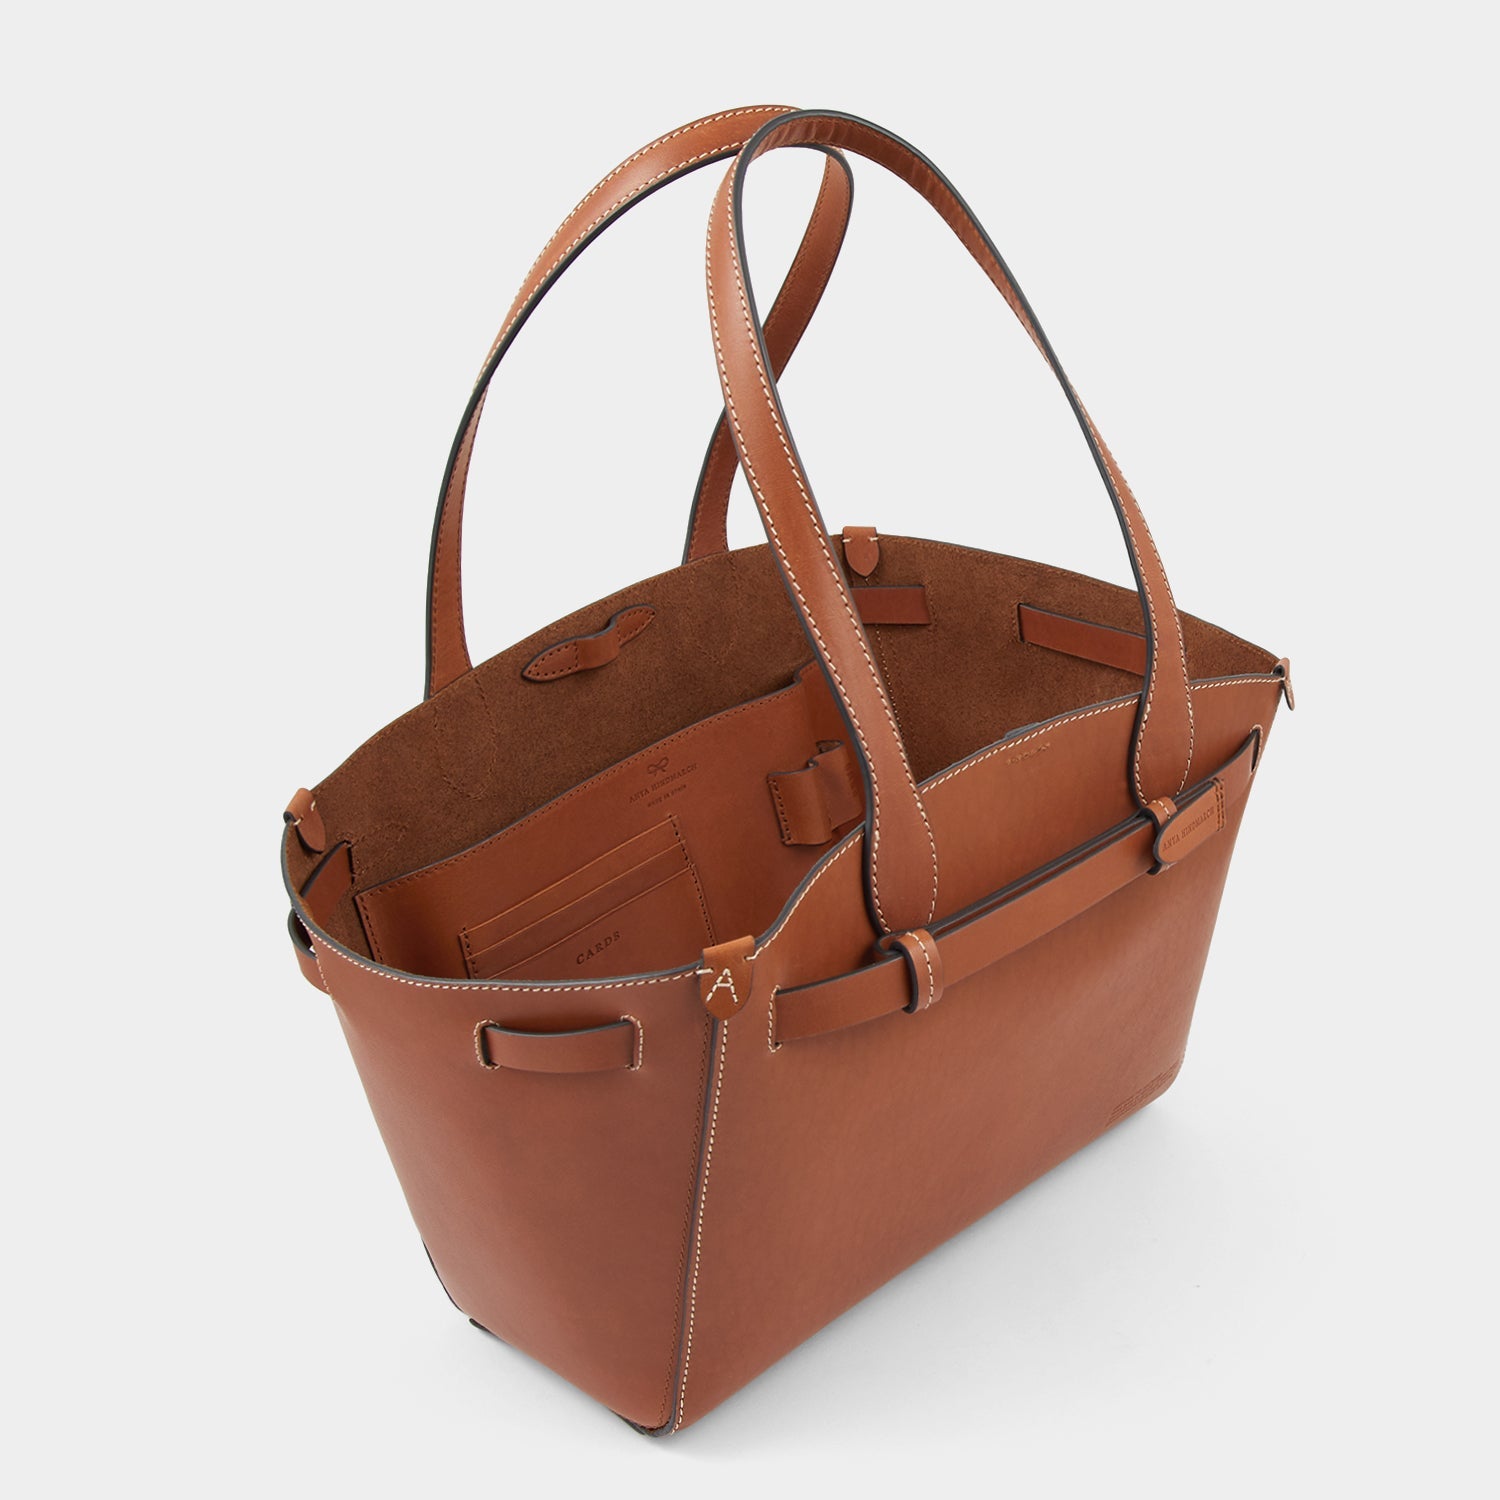 Return to Nature Tote Small -

                  
                    Compostable Leather in Tan -
                  

                  Anya Hindmarch EU
